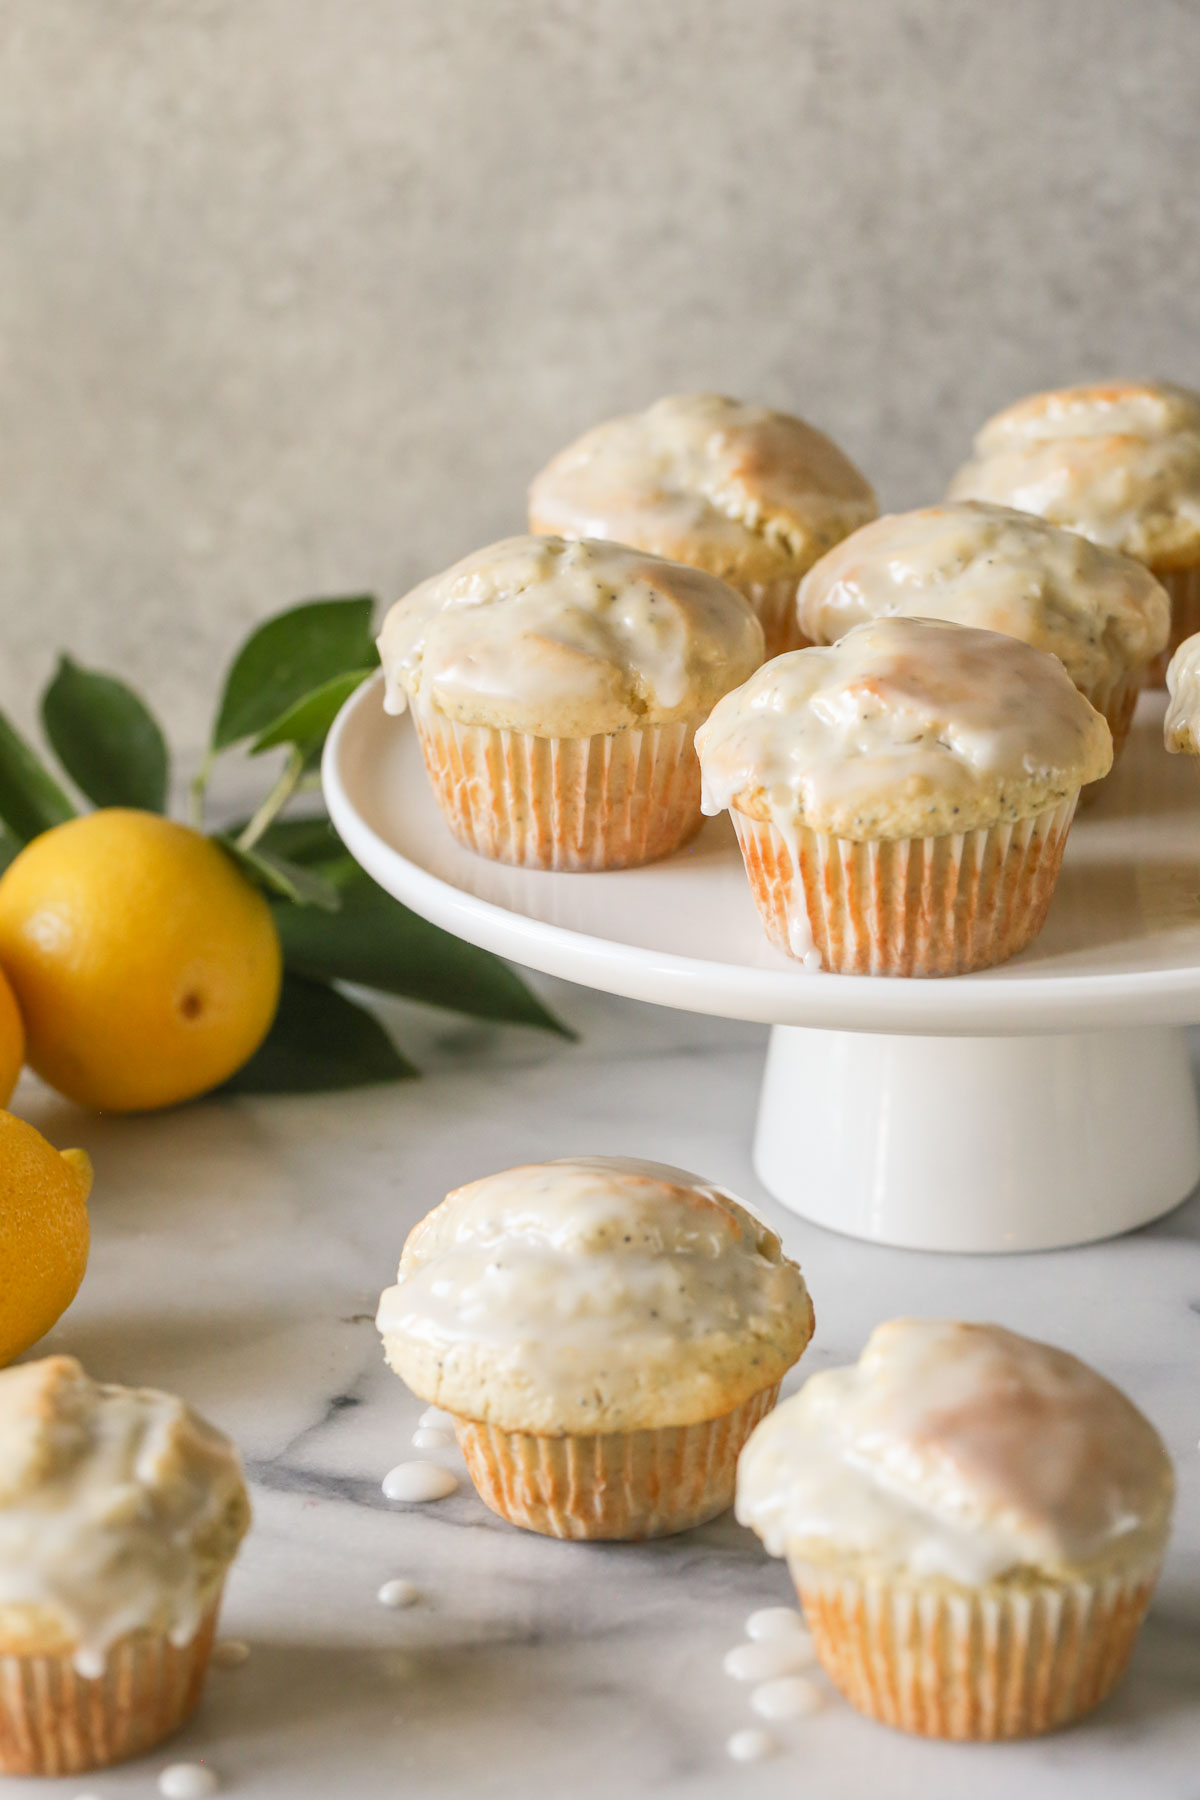 Glazed Lemon Poppy Seed Muffins on a cake stand with three muffins next to the stand, along with a branch from a lemon tree and whole lemons. 